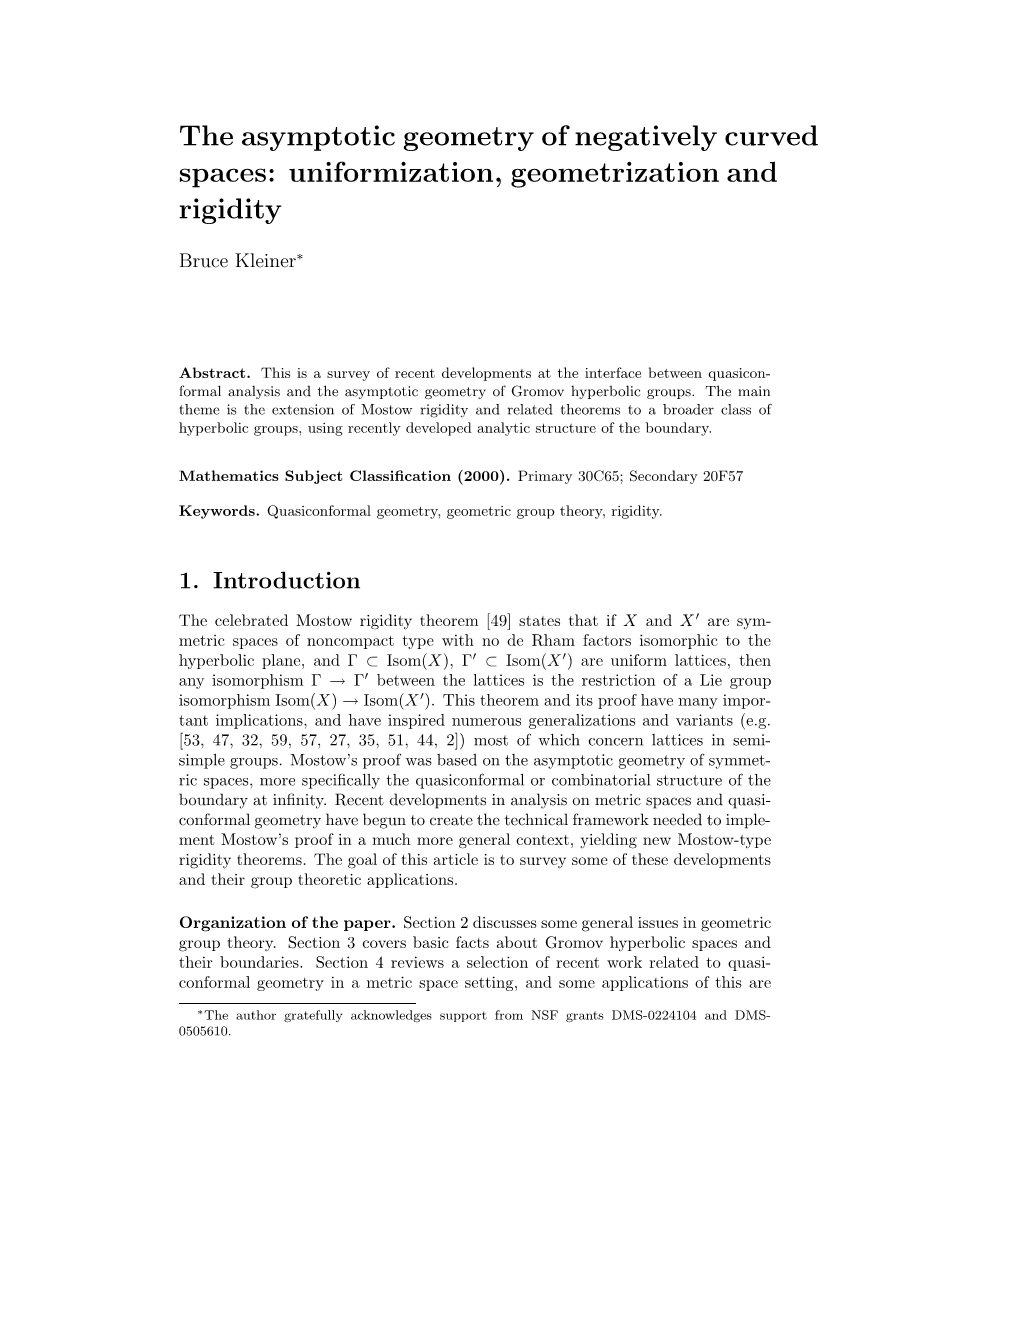 The Asymptotic Geometry of Negatively Curved Spaces: Uniformization, Geometrization and Rigidity